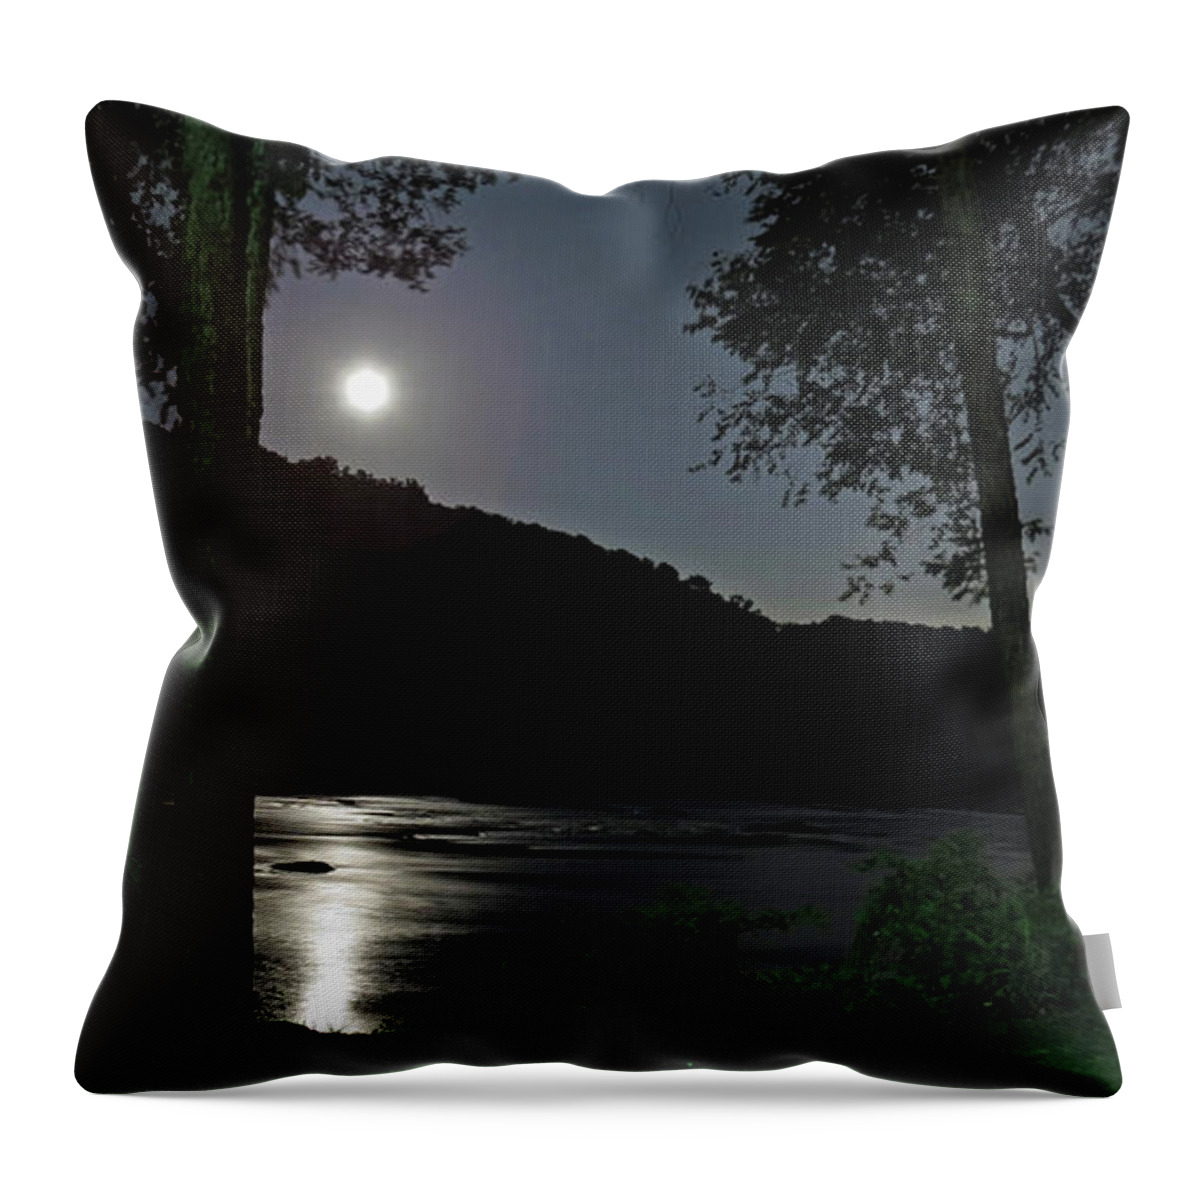 River Throw Pillow featuring the digital art River In Moonlight by Kathleen Illes